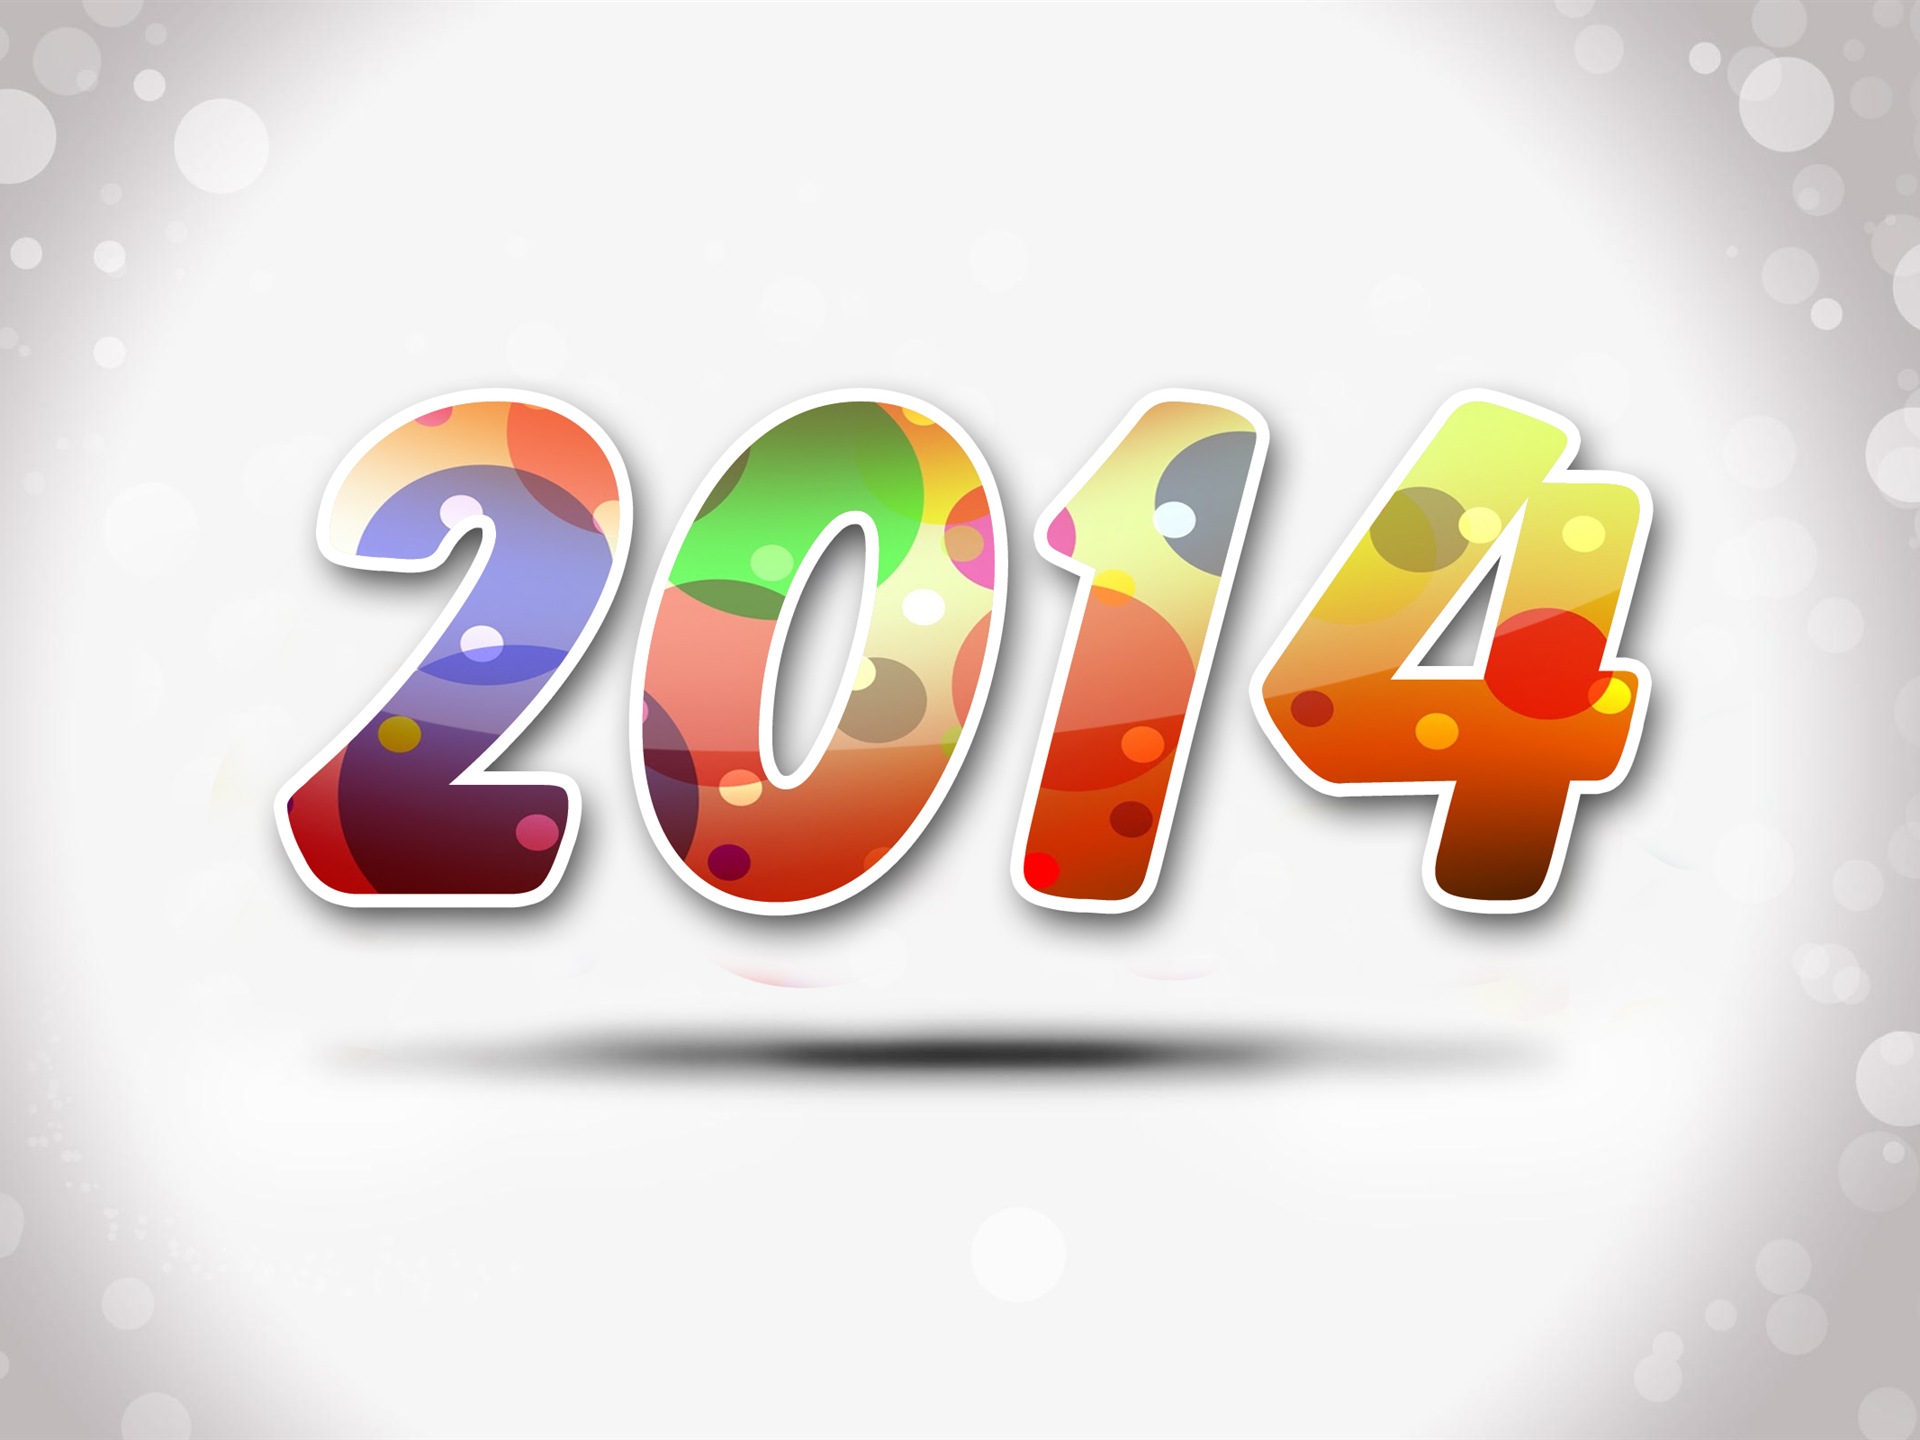 2014 New Year Theme HD Wallpapers (2) #17 - 1920x1440